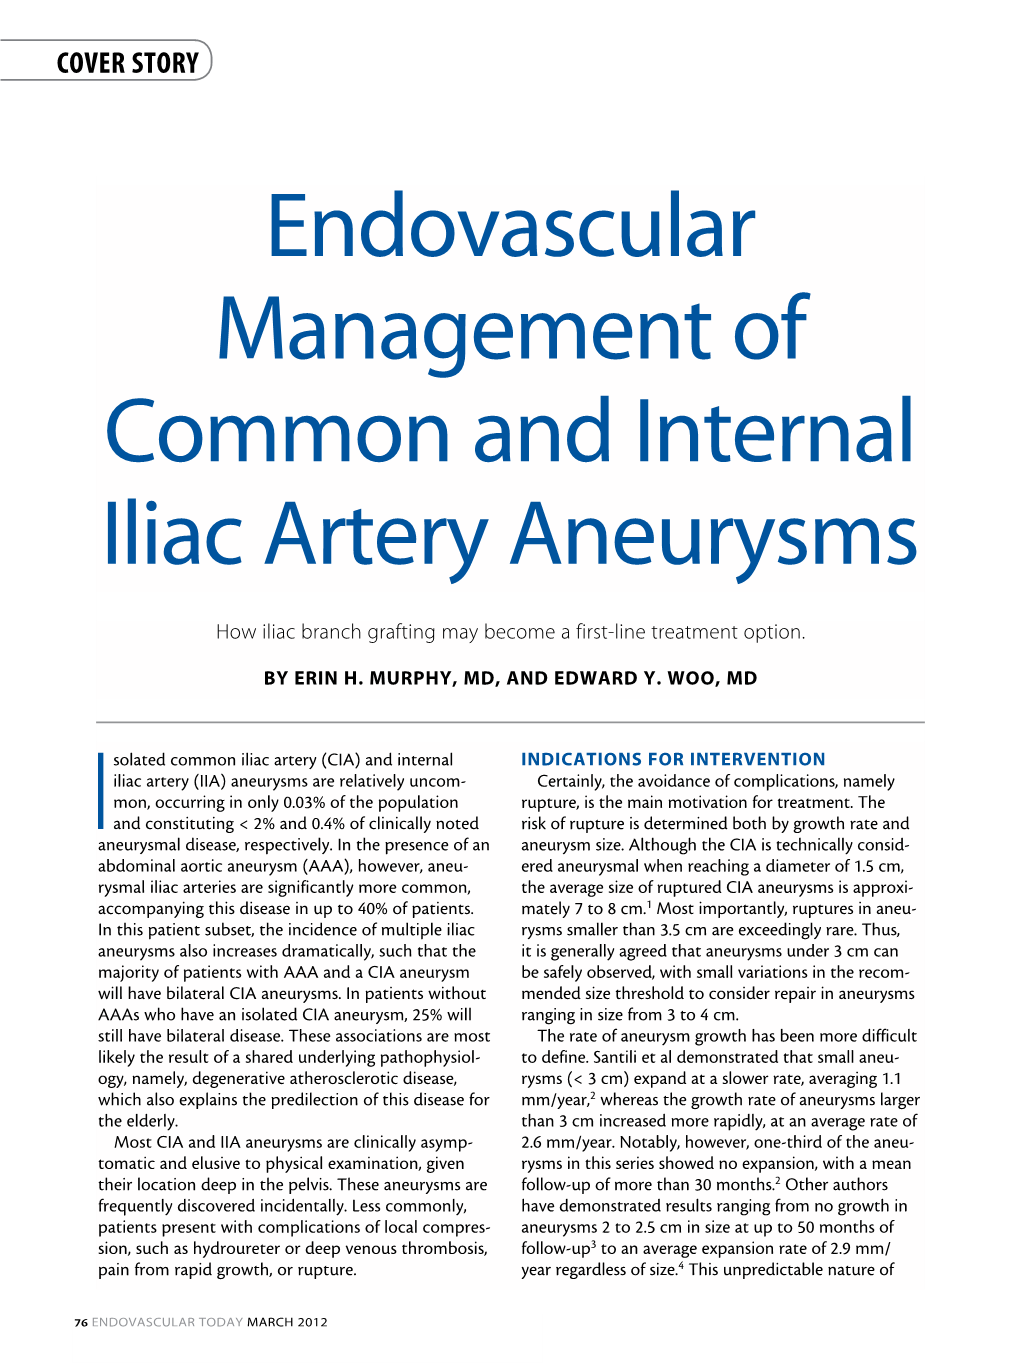 Endovascular Management of Common and Internal Iliac Artery Aneurysms